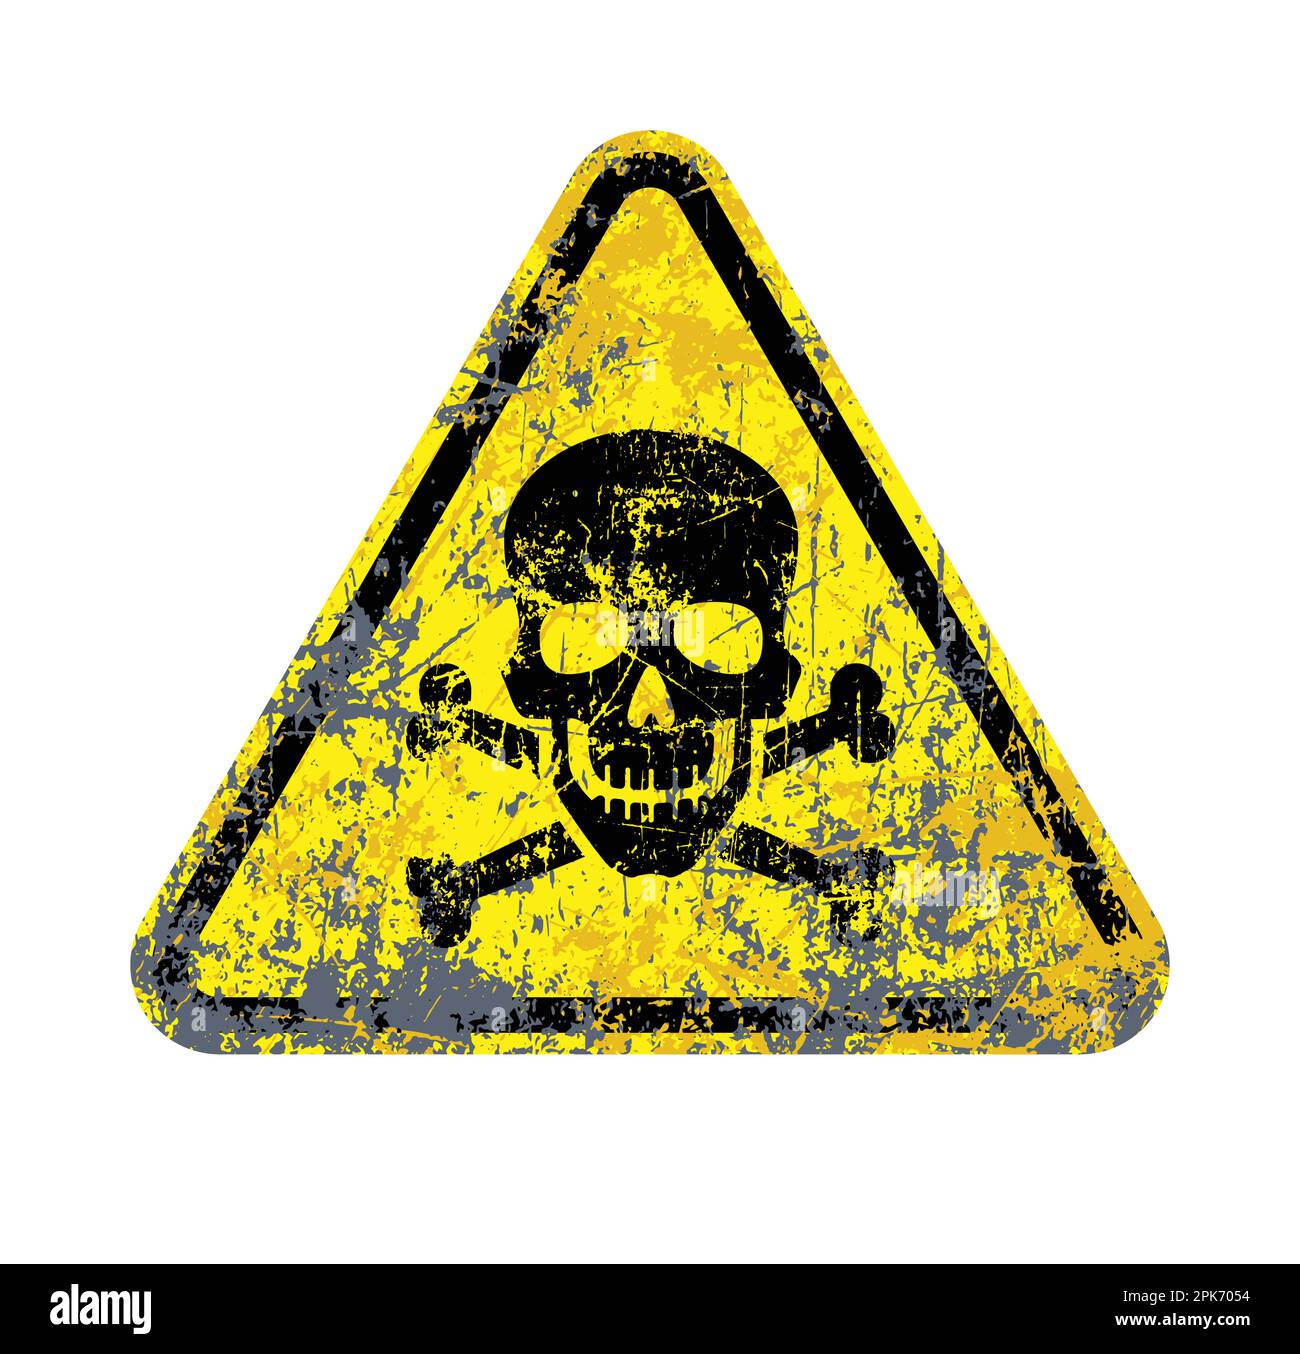 classic poison skull and crossbones in yellow warning danger triangle distressed grunge scratched symbol silhouette isolated on white background vecto Stock Vector